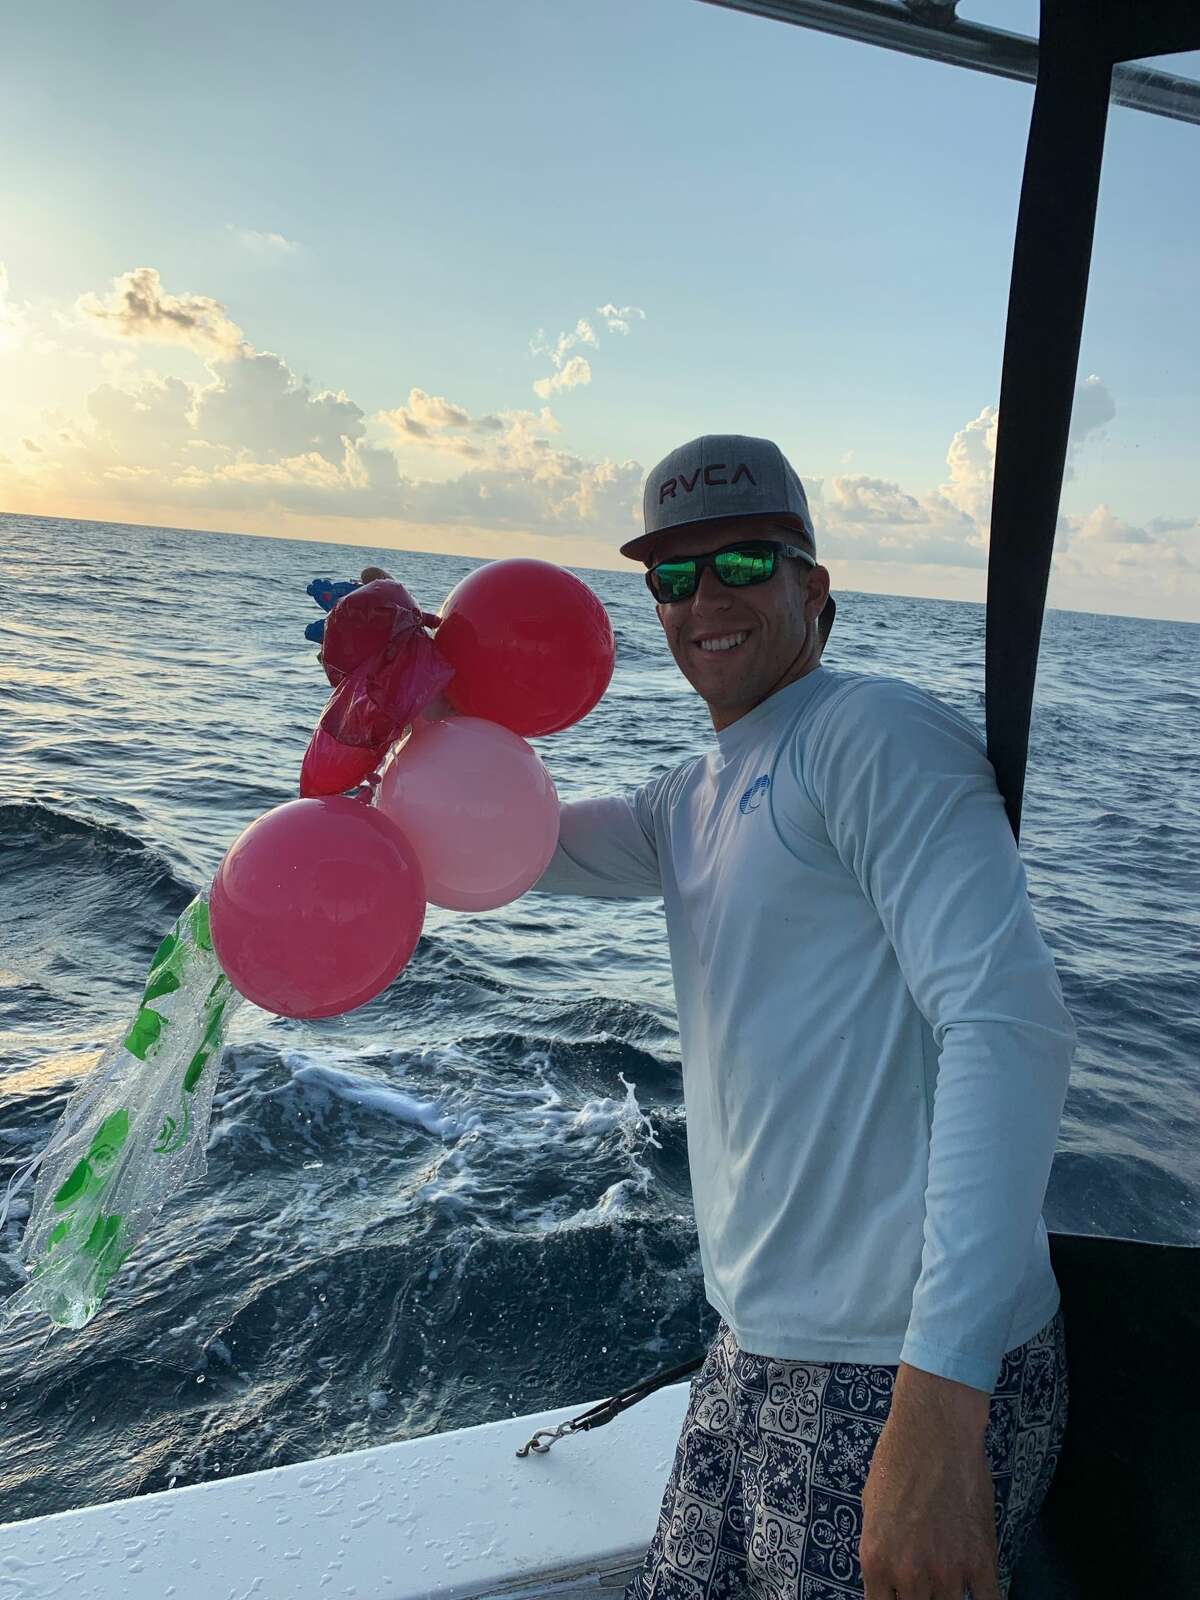 A group of captains with Galveston Sea Ventures has started a "balloon roundup" challenge to help educate the public on the dangers of balloon releases. Captain Shane Cantrell said sea turtles are especially at risk because they often get tangled in the ribbons or ingest the colorful balloons after mistaking them for jellyfish.